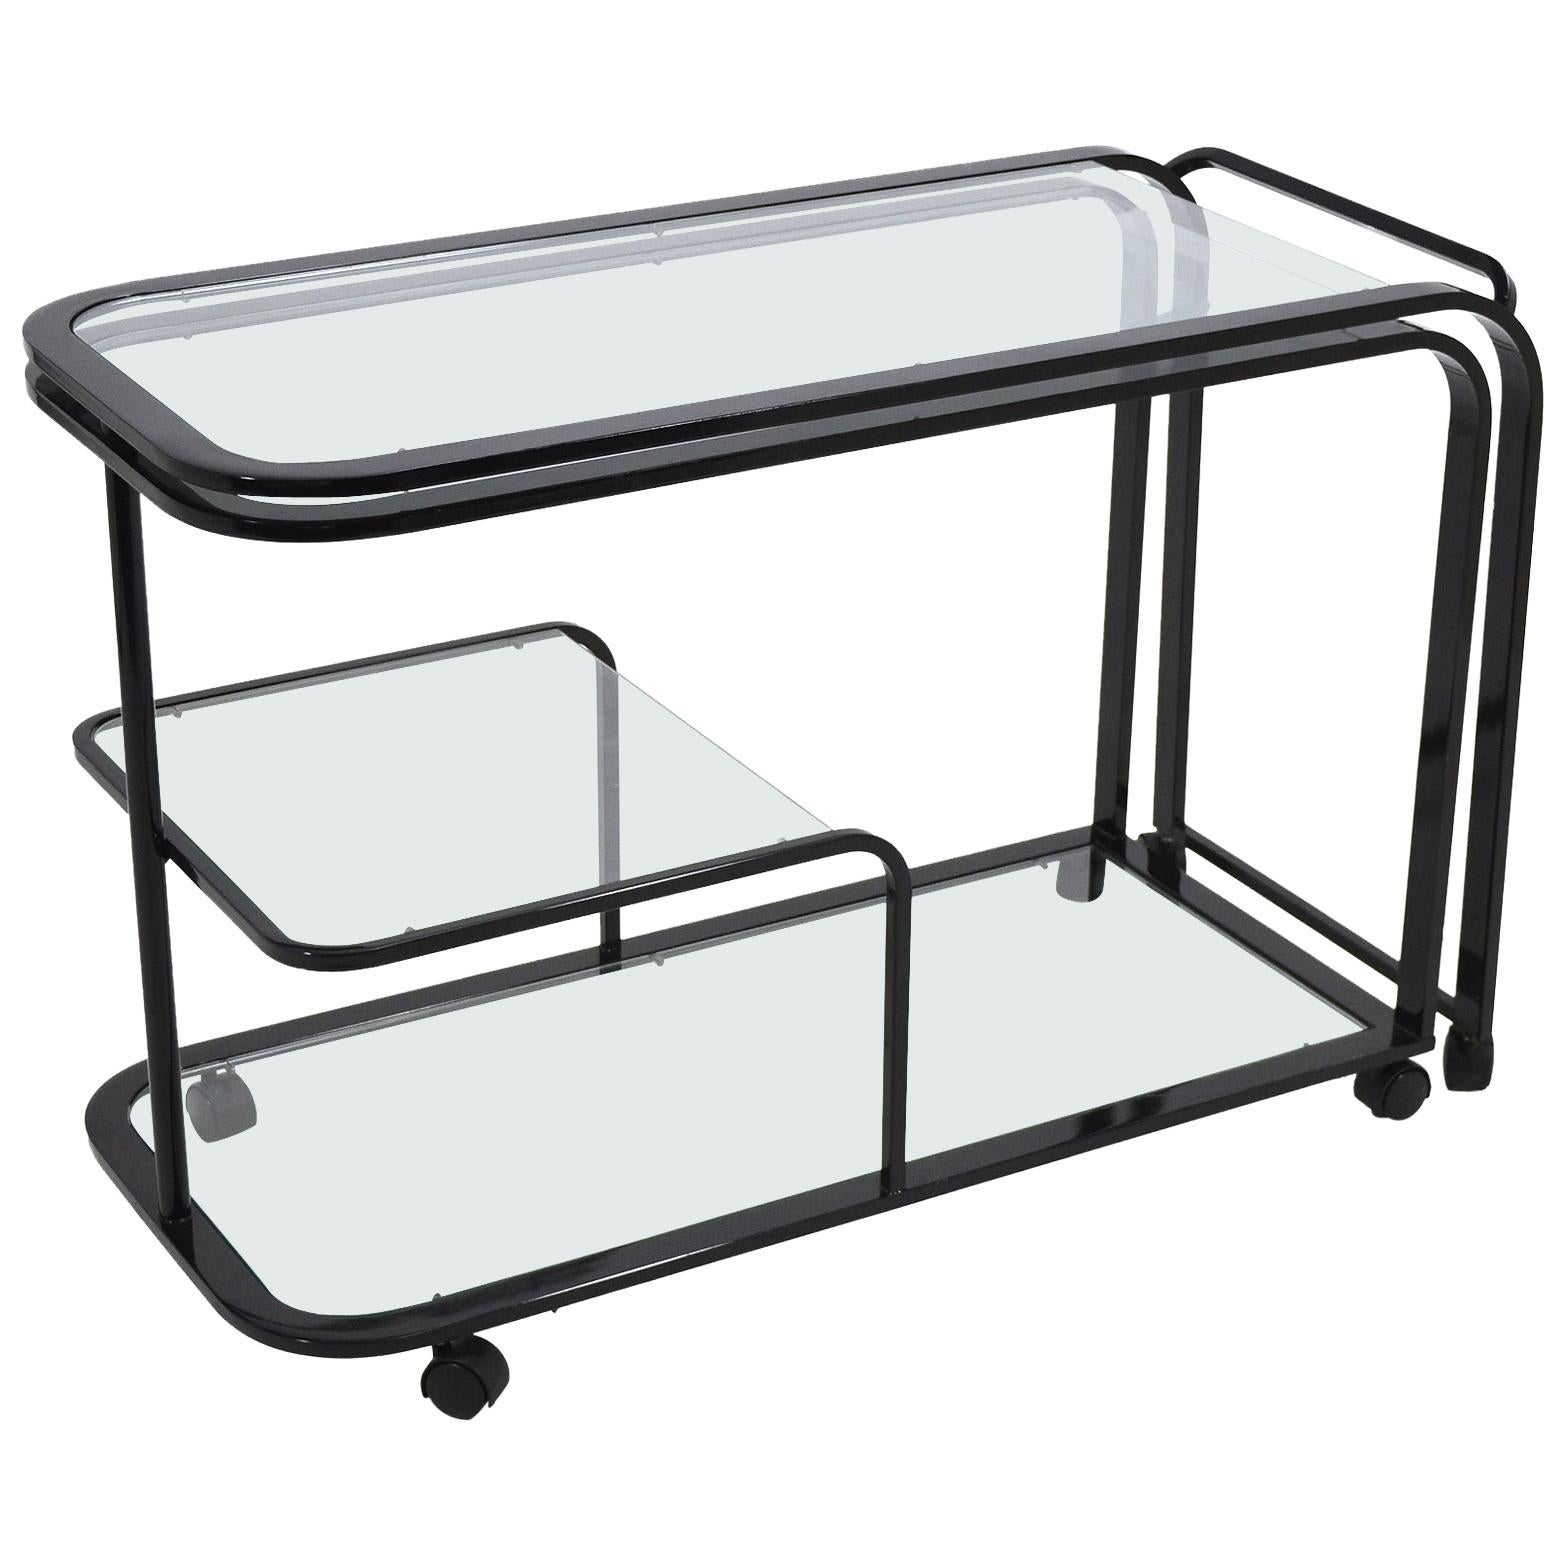 Expandable Bar or Serving Cart by D.I.A.